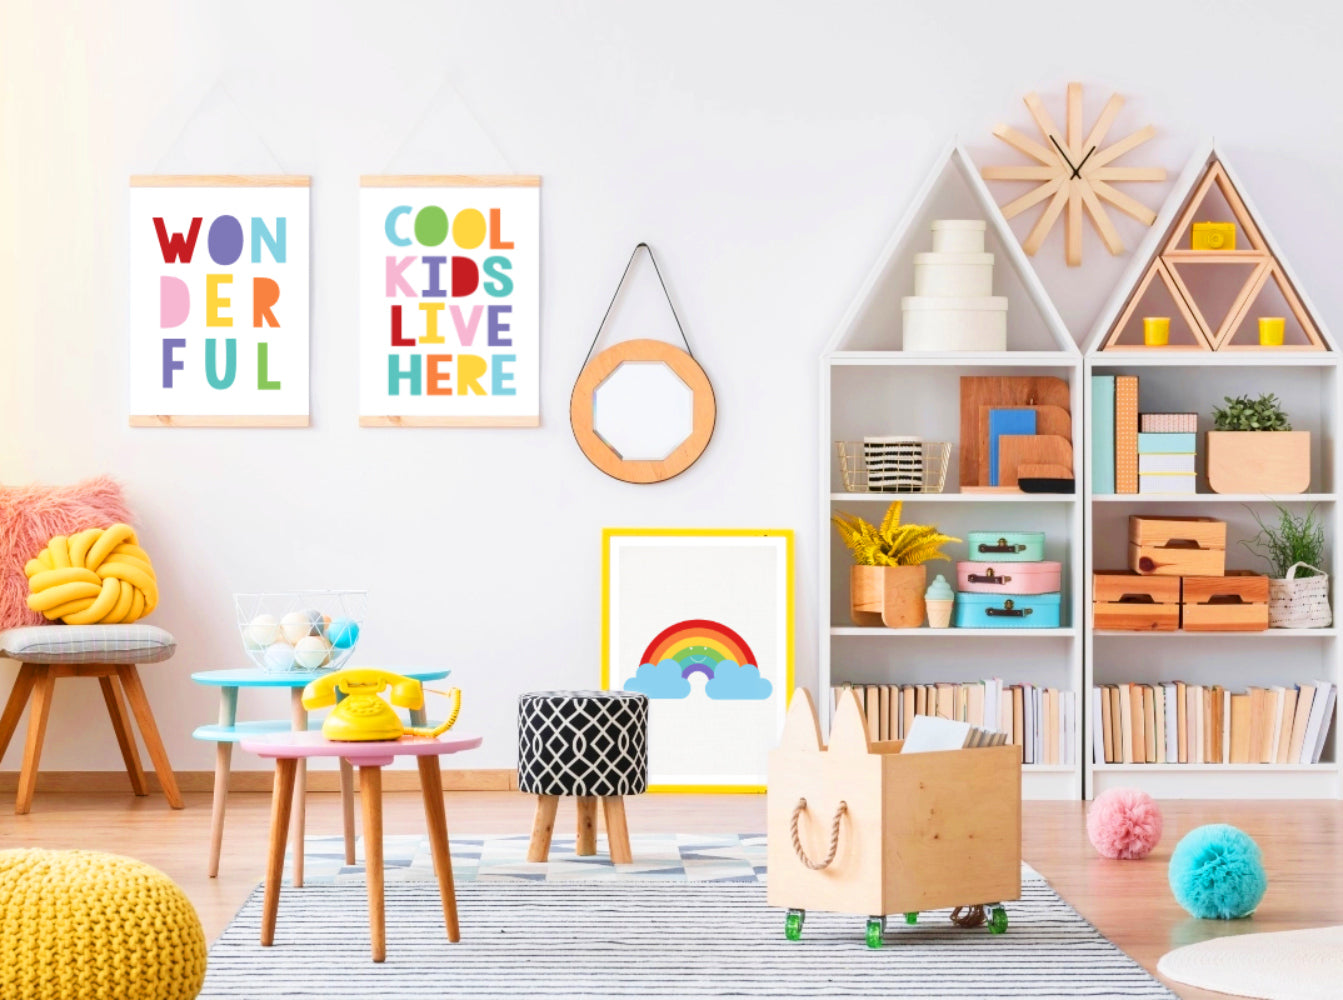 Kids playroom with colourful posters